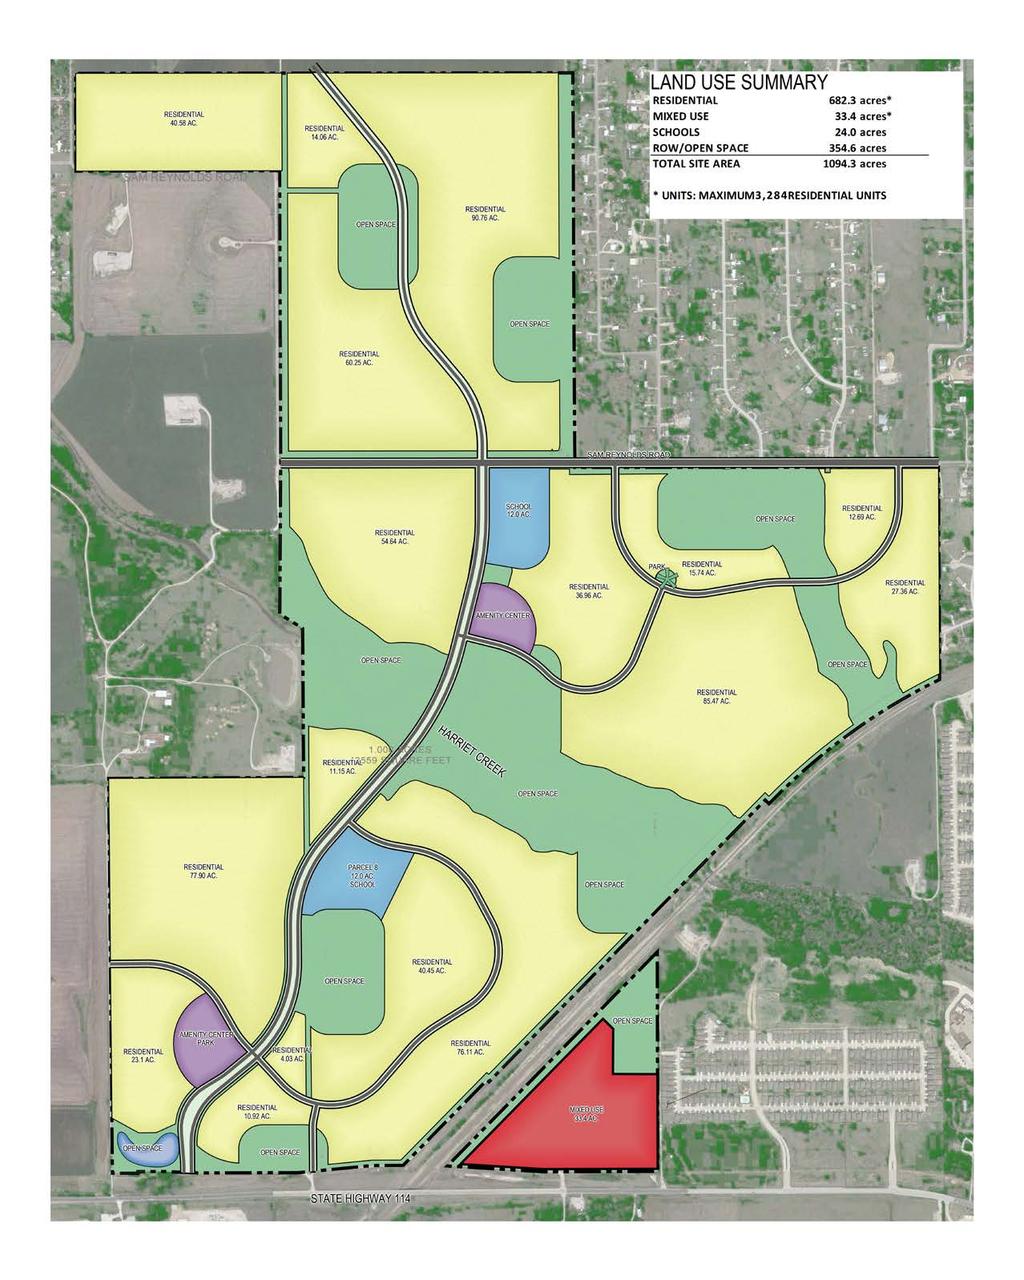 LAND USE SUMMARY LAND USE SUMMARY RESIDENTIAL MIXED USE SCHOOLS ROW/OPEN SPACE TOTAL SITE AREA 682.